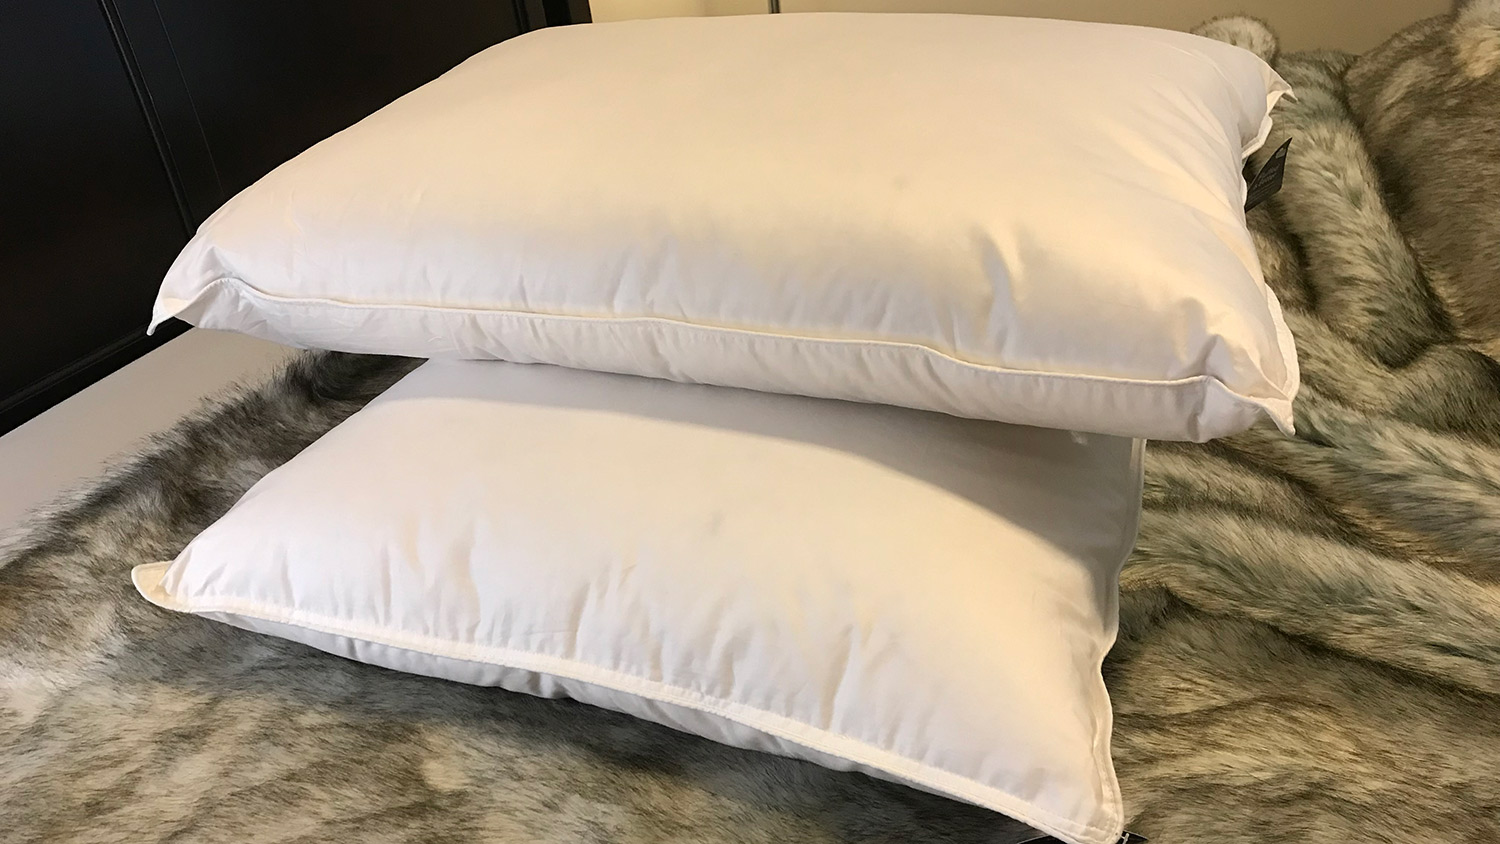 Two Brooklinen Plush Down Pillows stacked on top of one another